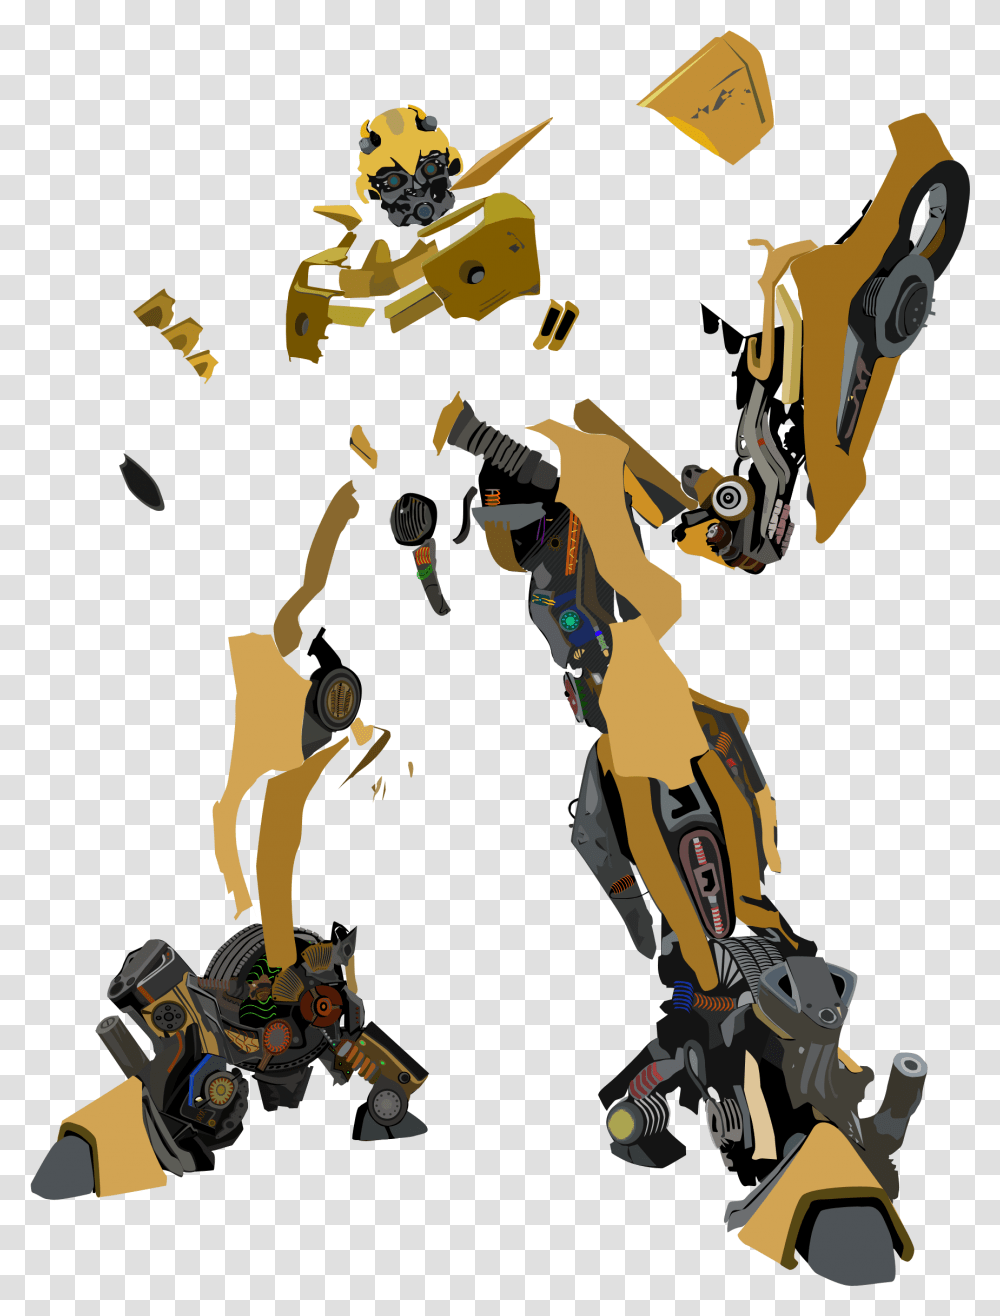 Transformers Bumblebee Full Body, Robot, Apidae, Insect, Invertebrate Transparent Png